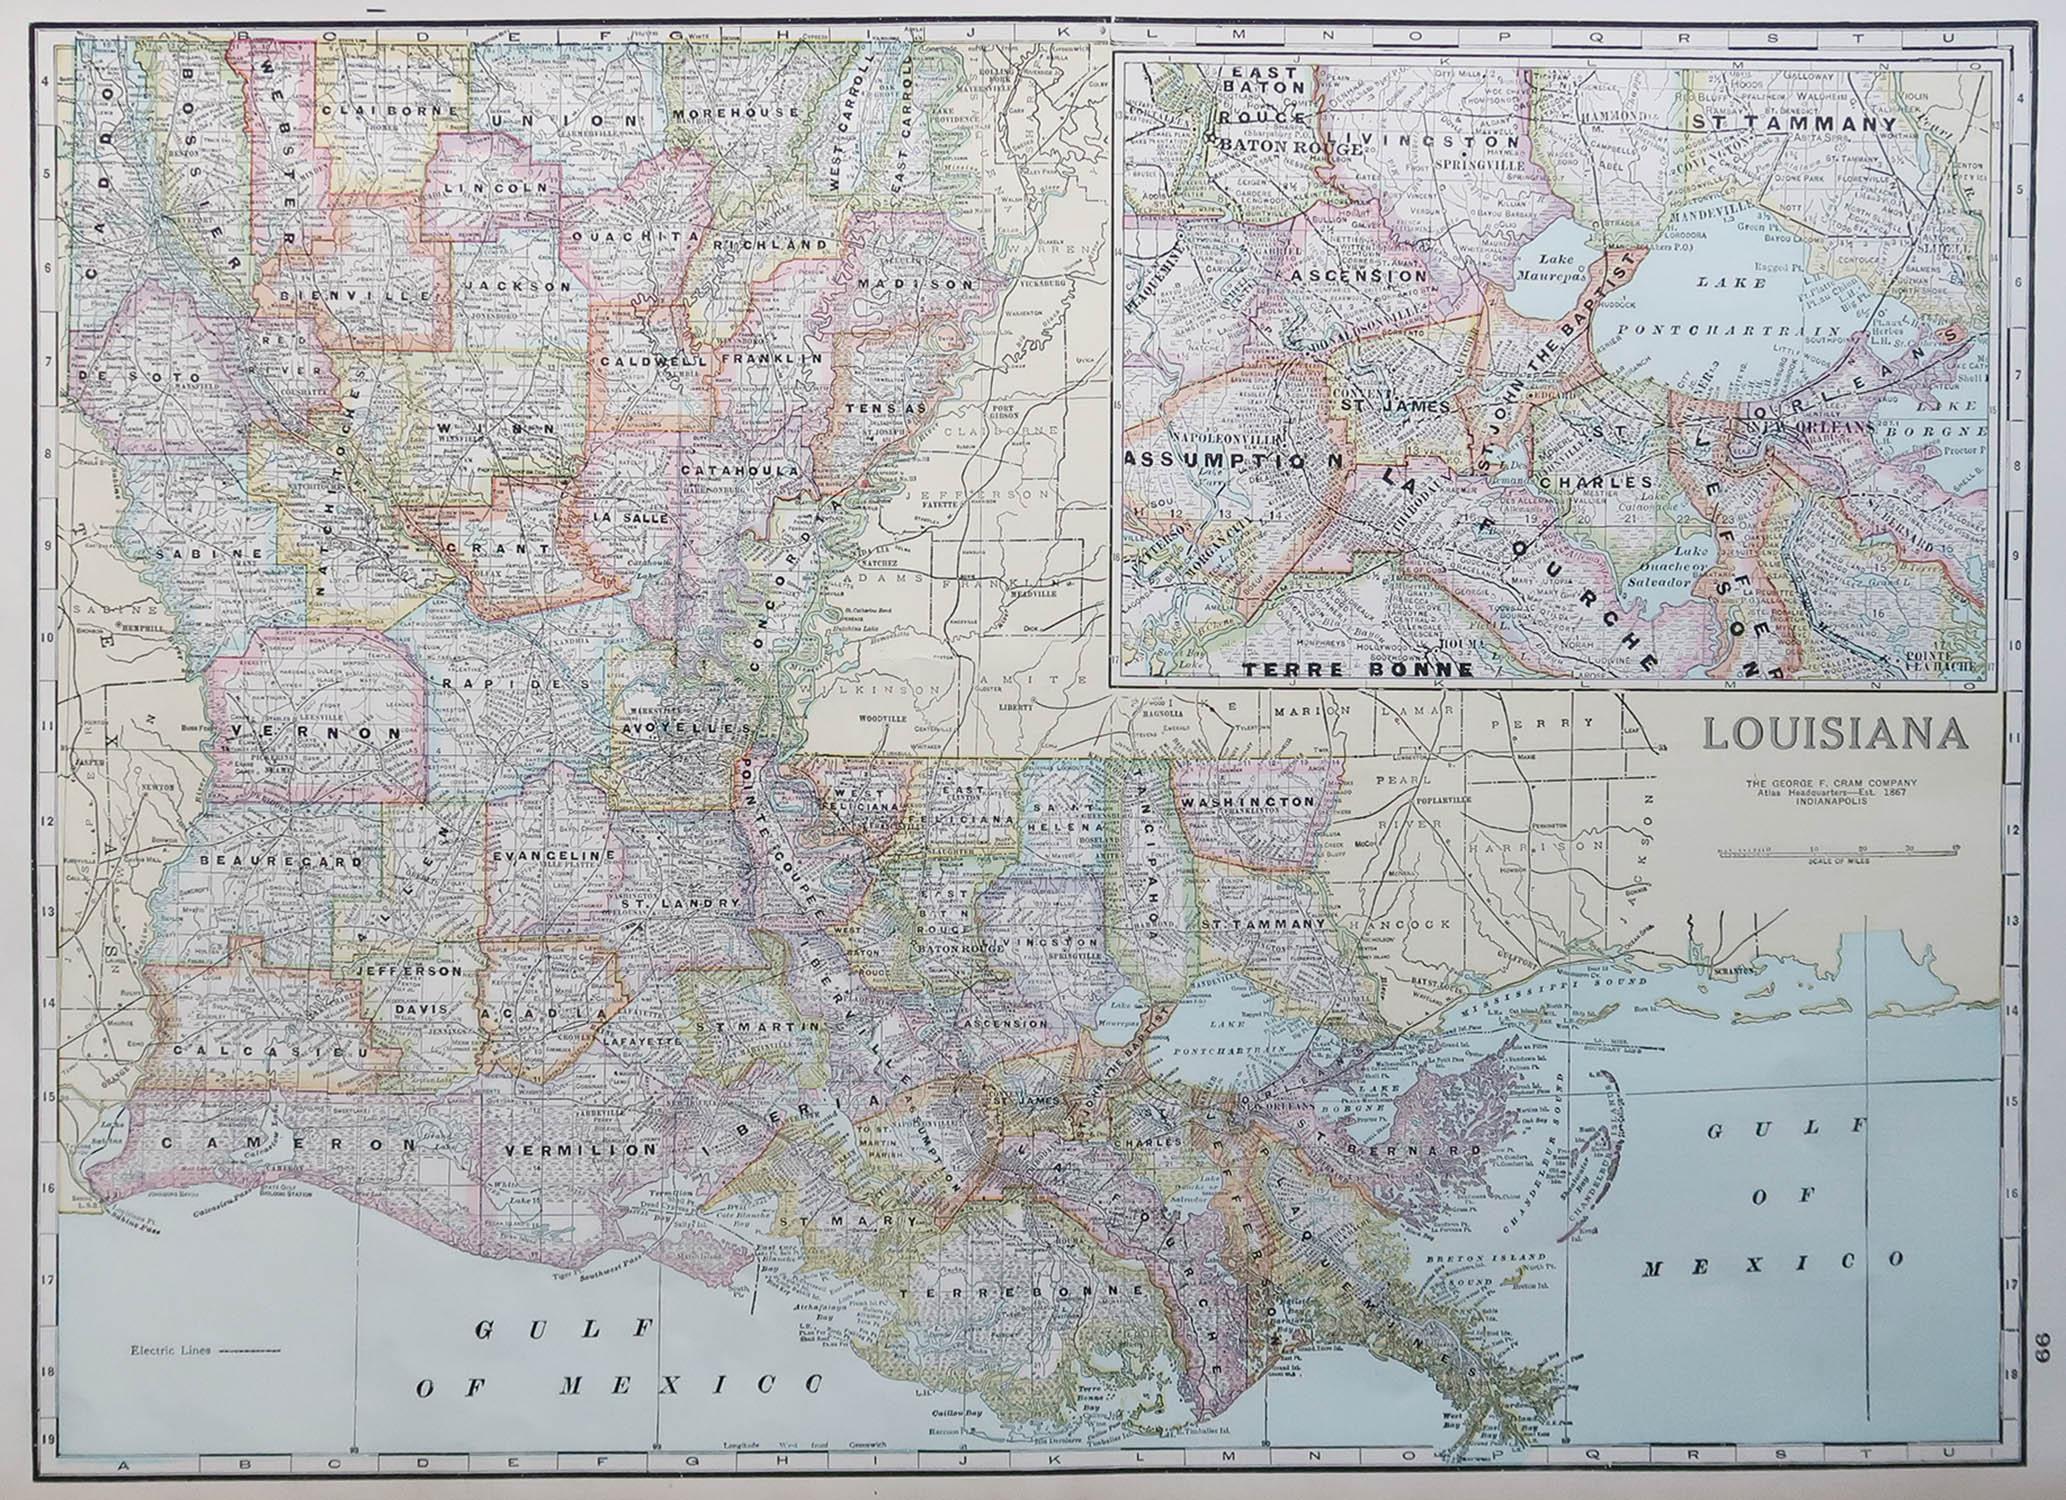 Fabulous map of Louisiana.

Original color.

Engraved and printed by the George F. Cram Company, Indianapolis.

Published, c.1900.

Unframed.

Repair to a small tear top left corner

Free shipping.